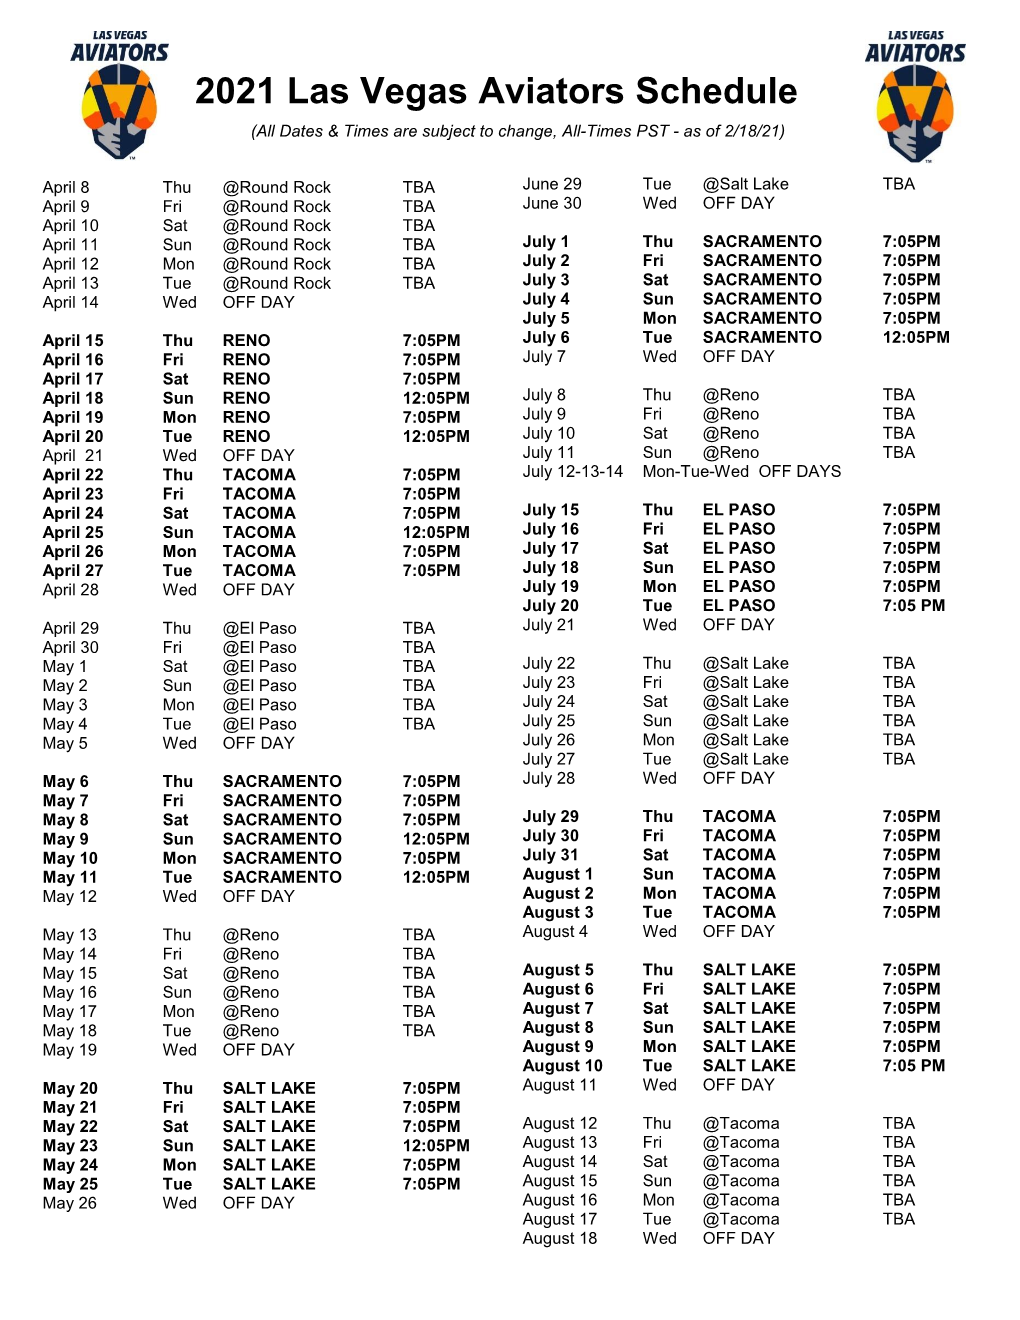 2021 Las Vegas Aviators Schedule (All Dates & Times Are Subject to Change, All-Times PST - As of 2/18/21)